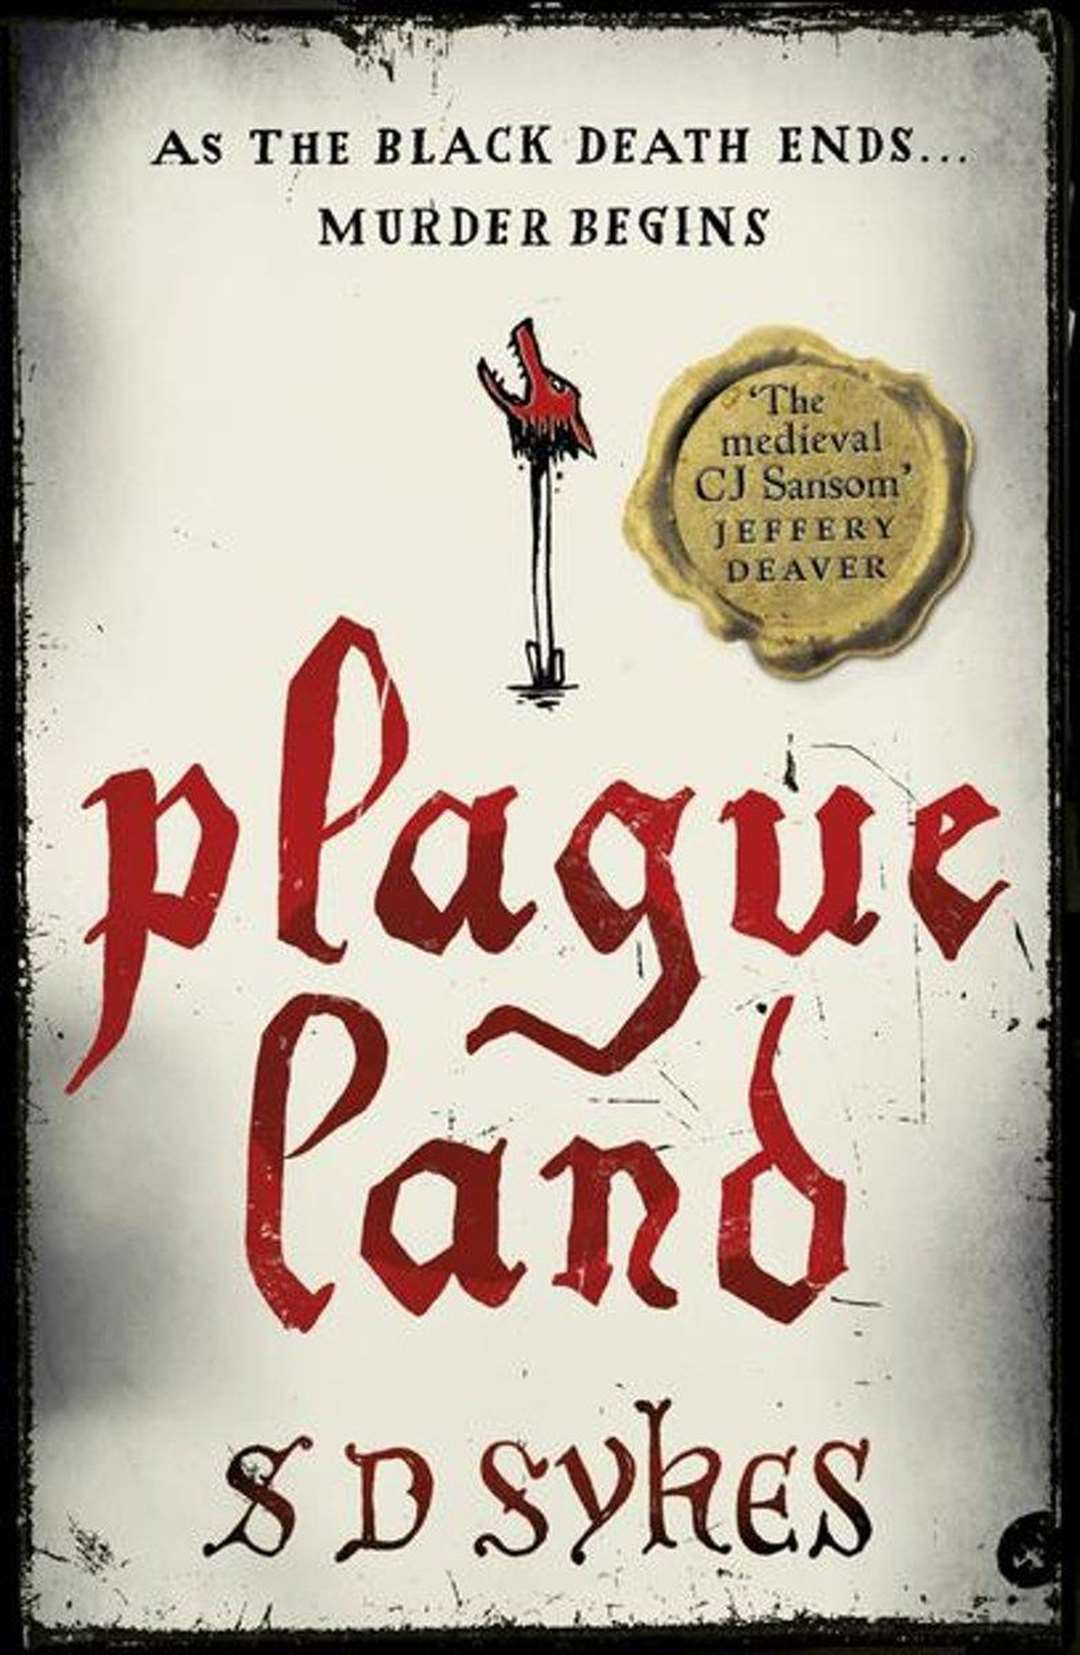 Plague Land by SD Sykes